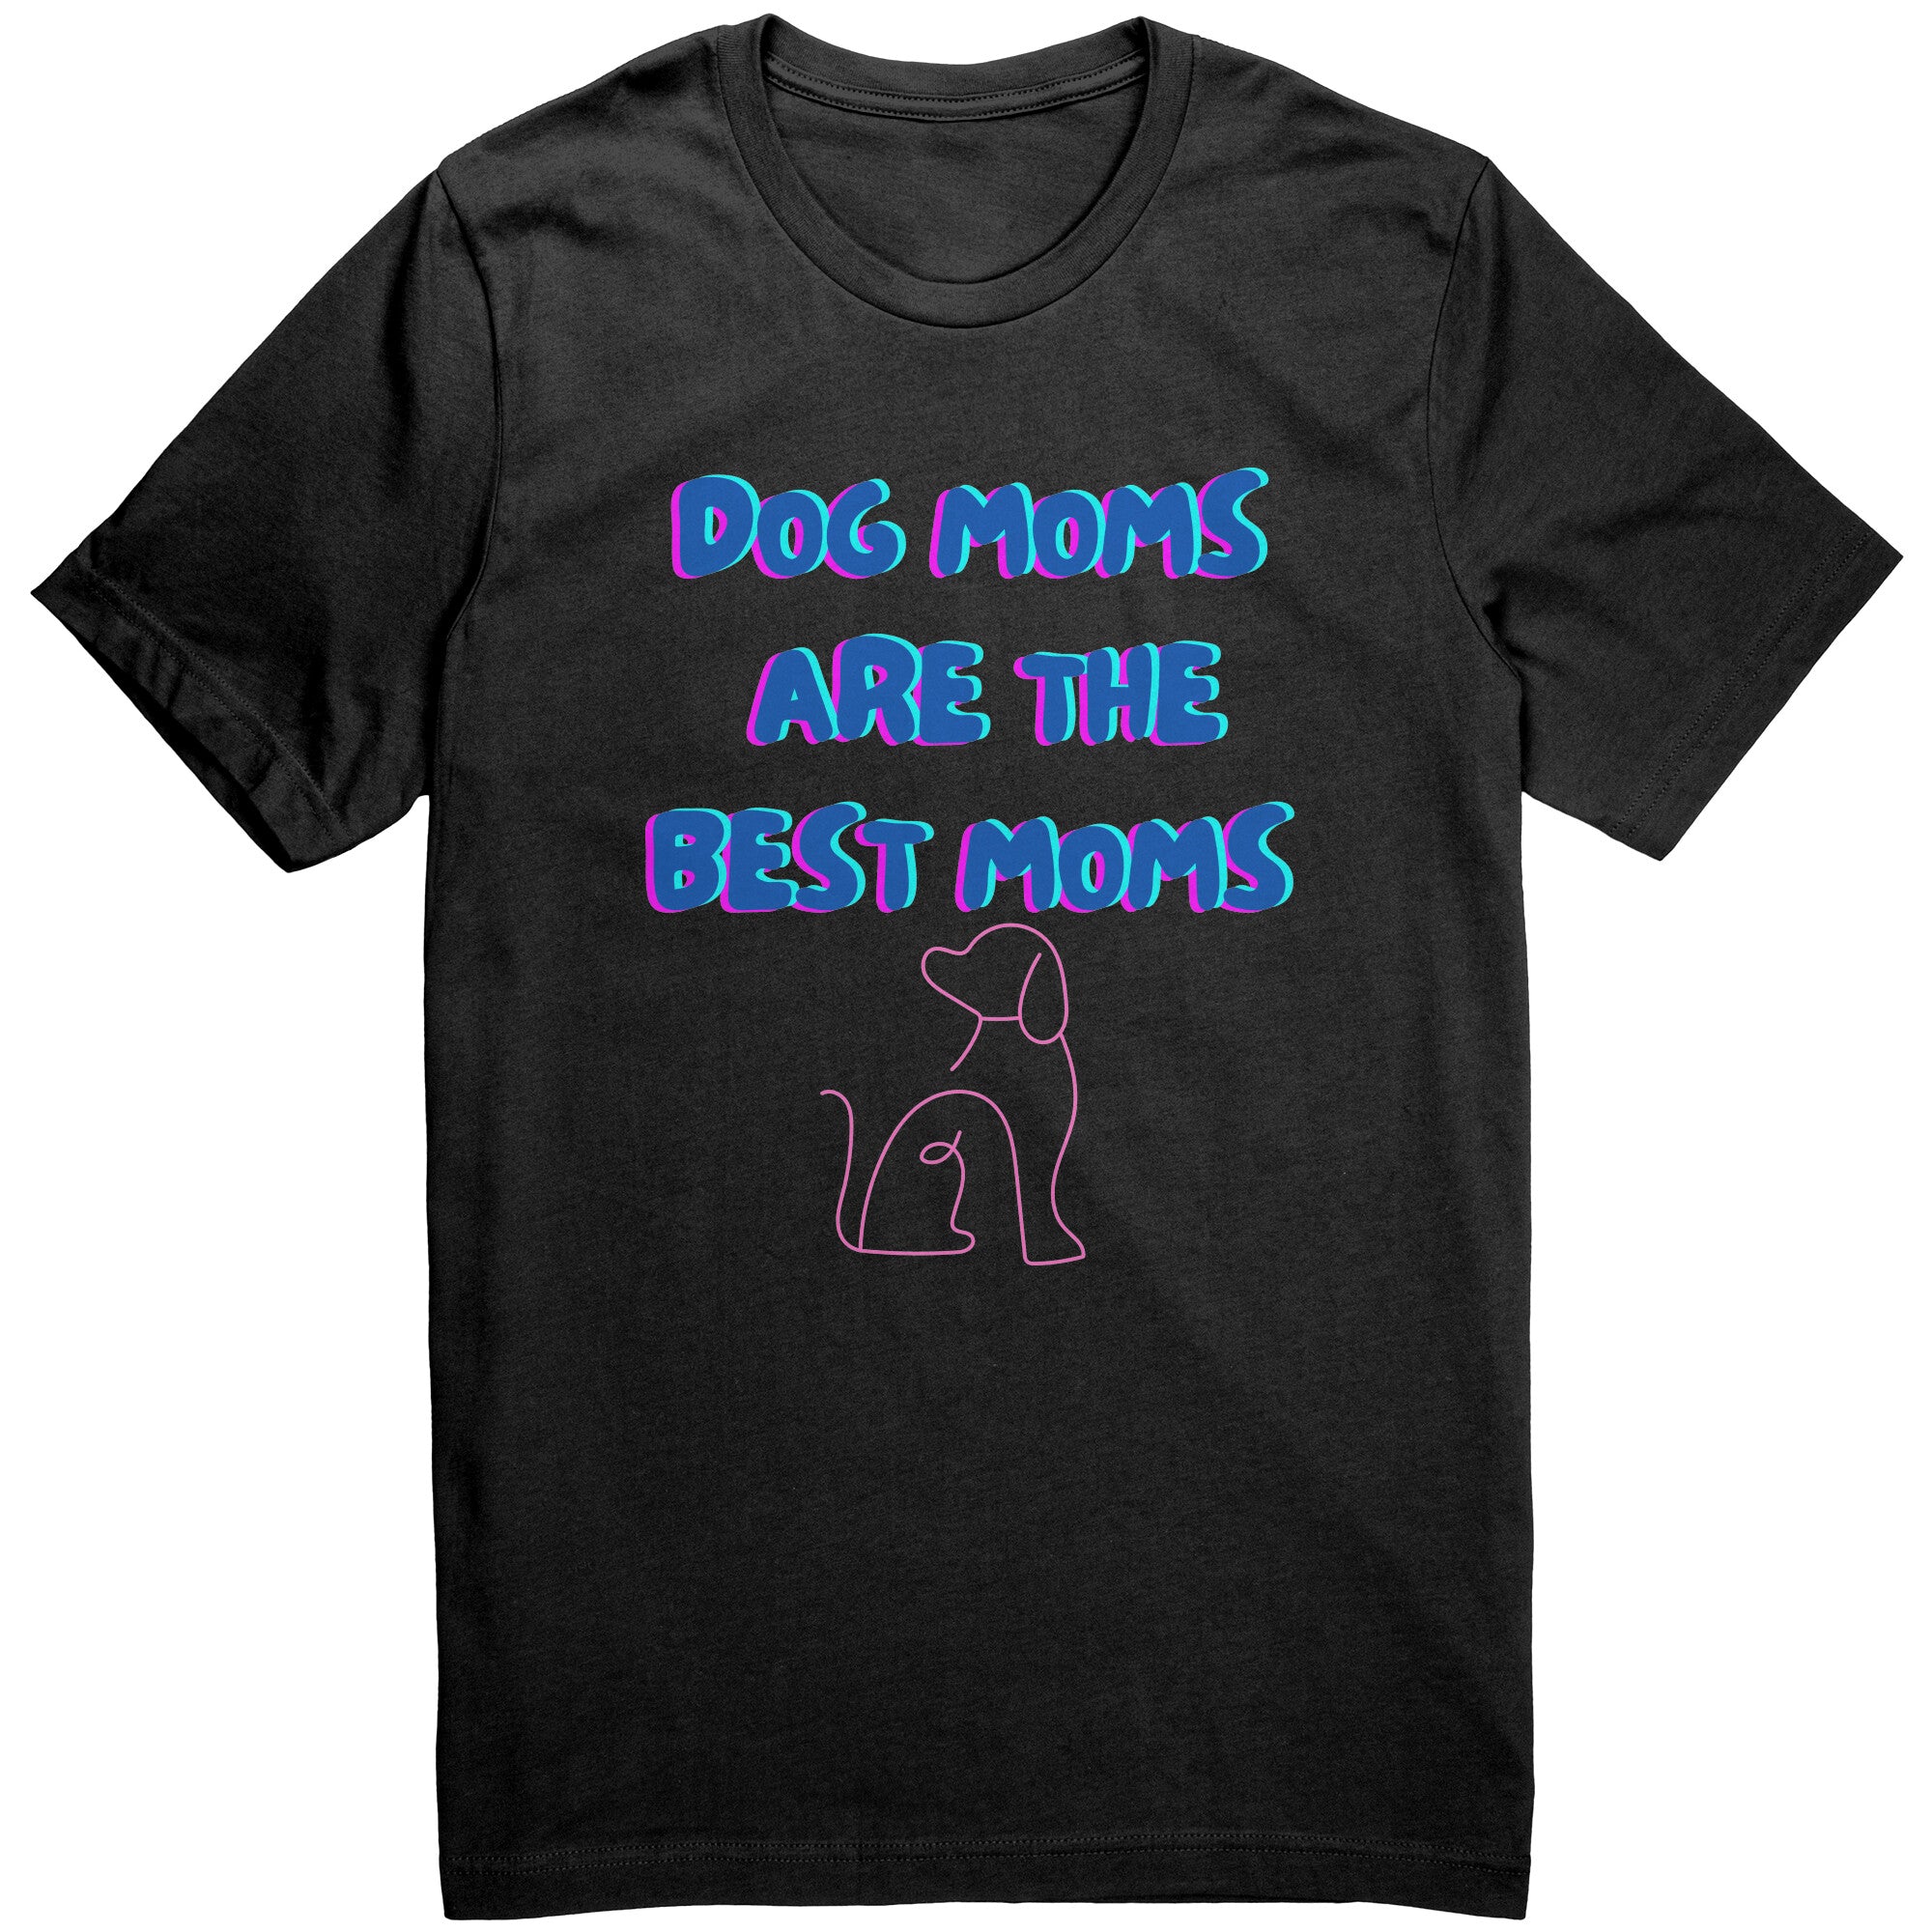 Dog Moms Are The Best Moms T-Shirt